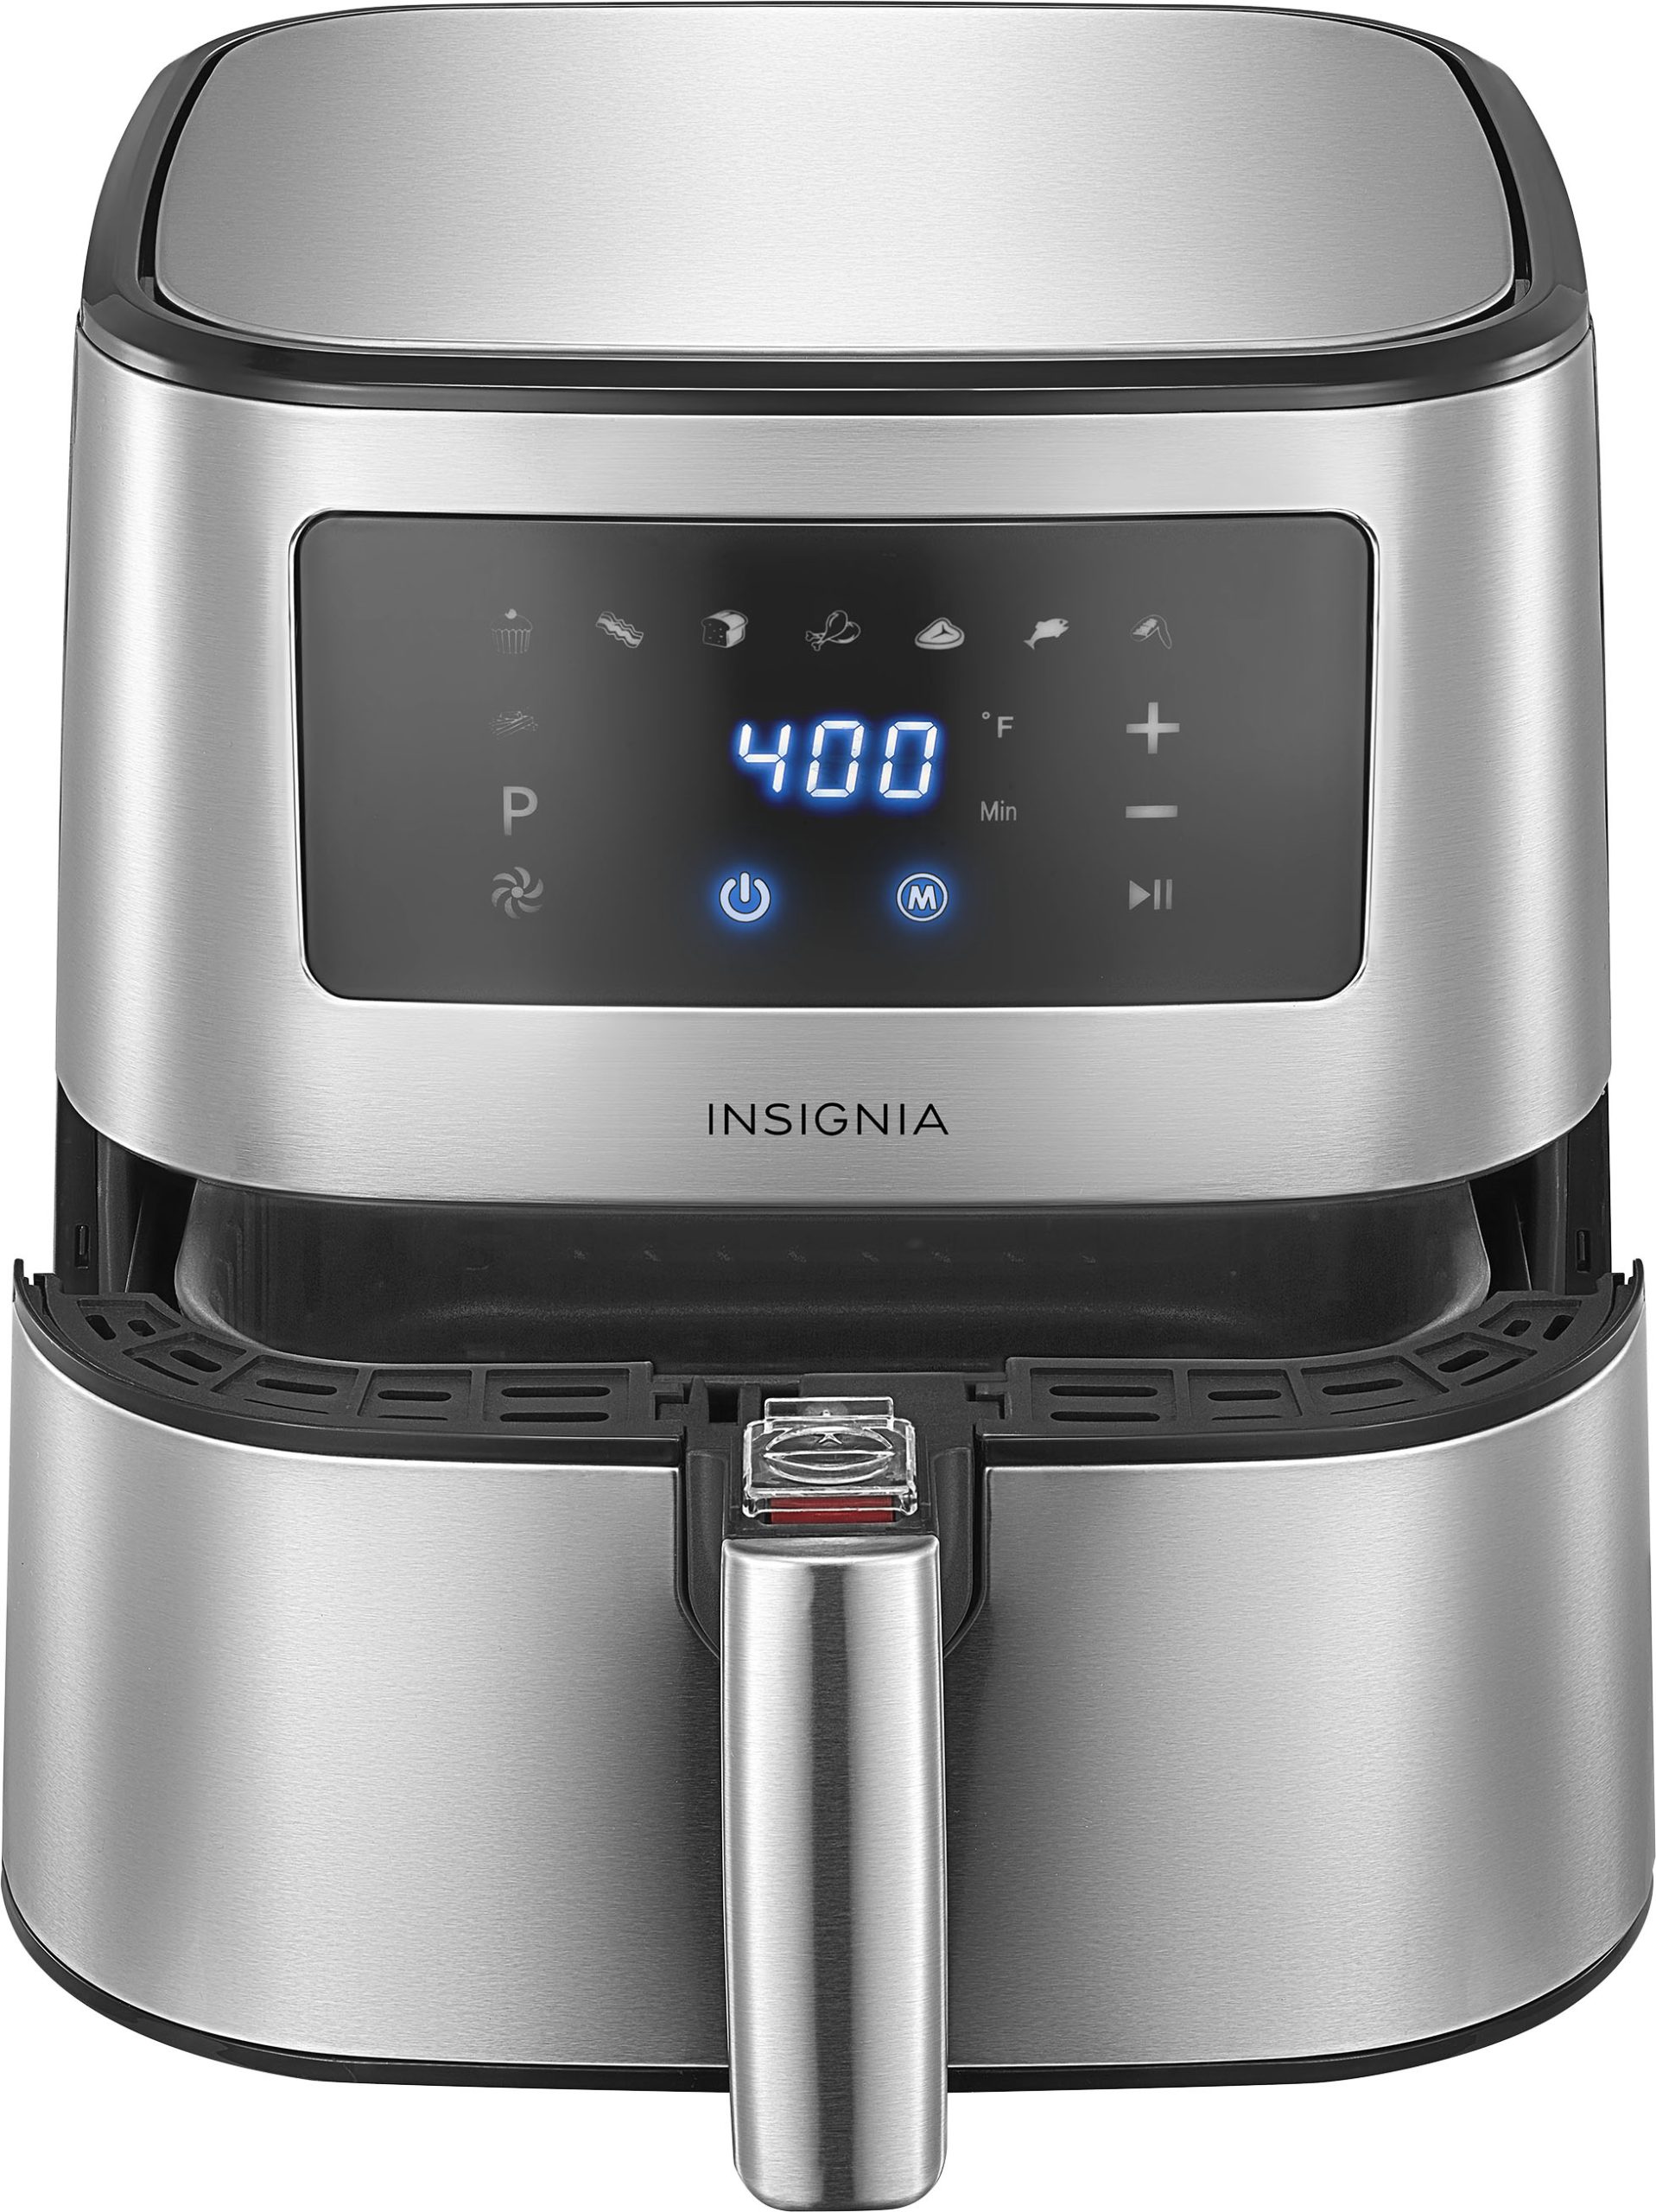 Insignia™ – 5 Qt. Digital Air Fryer – Stainless Steel – Just $49.99 at Best Buy